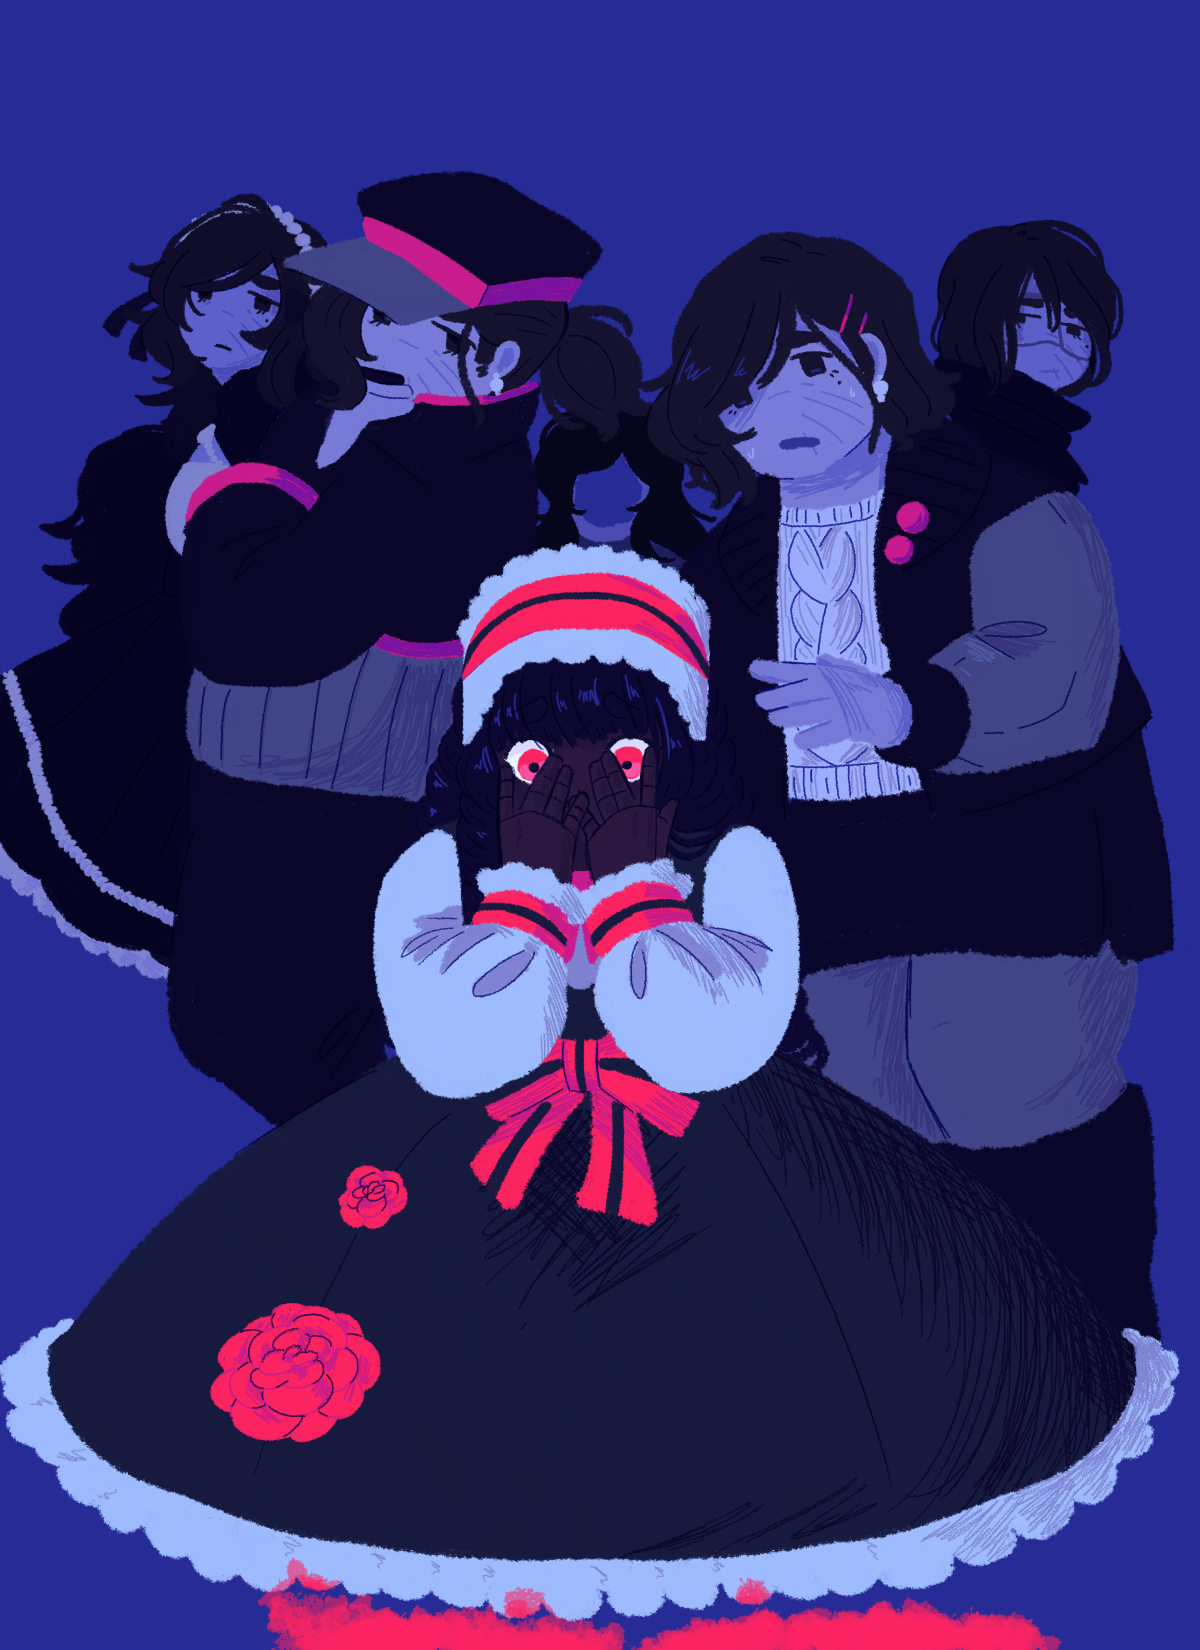 An illustration of Adeola being surrounded by different versions of Jirair as she stares down at a pool of blood. The palette is blue and neon pink.